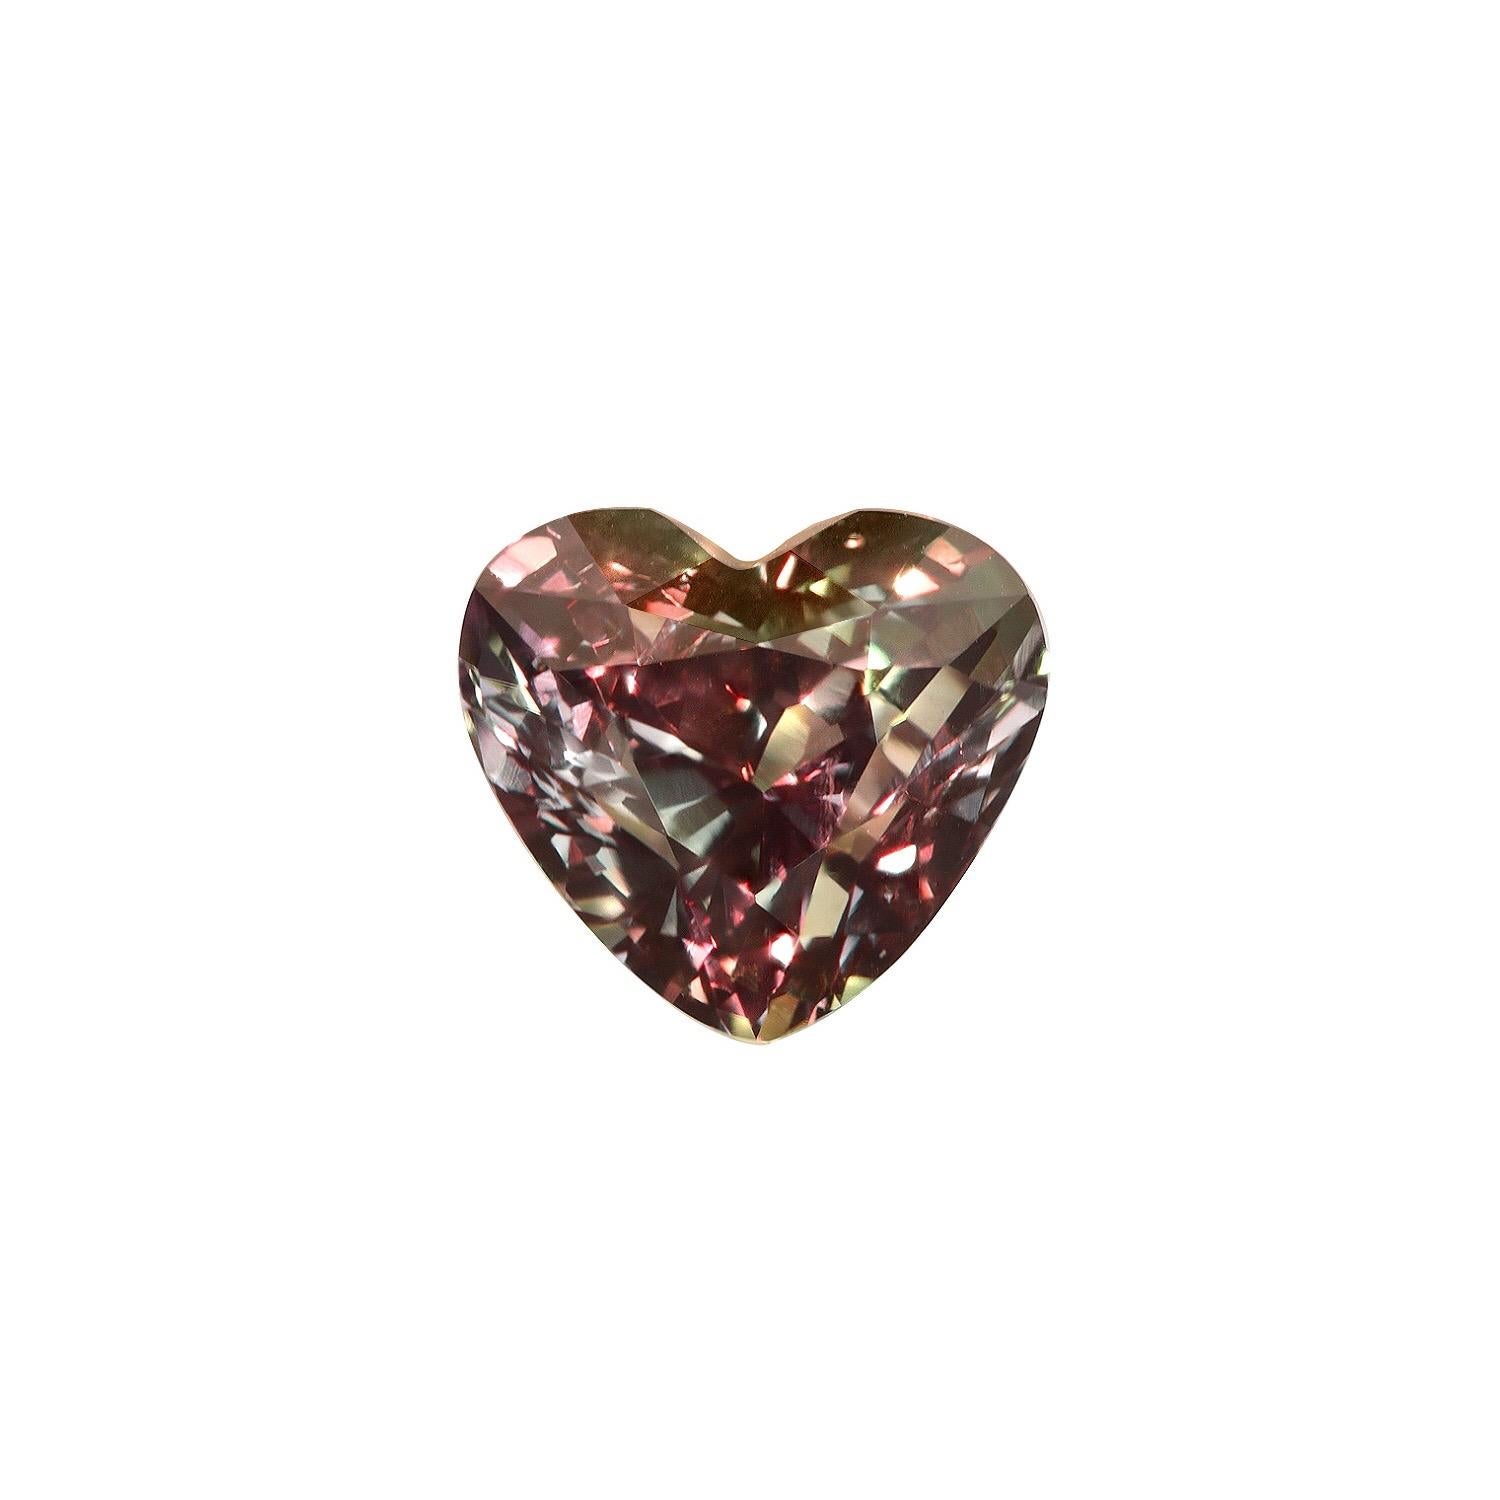 Rare natural Alexandrite heart shape, weighing a total of 1.64 carats.
This collection quality gem, displaying a prominent color change, is offered loose, and it would make an exceptional unisex custom made jewelry creation. (Ring, necklace,